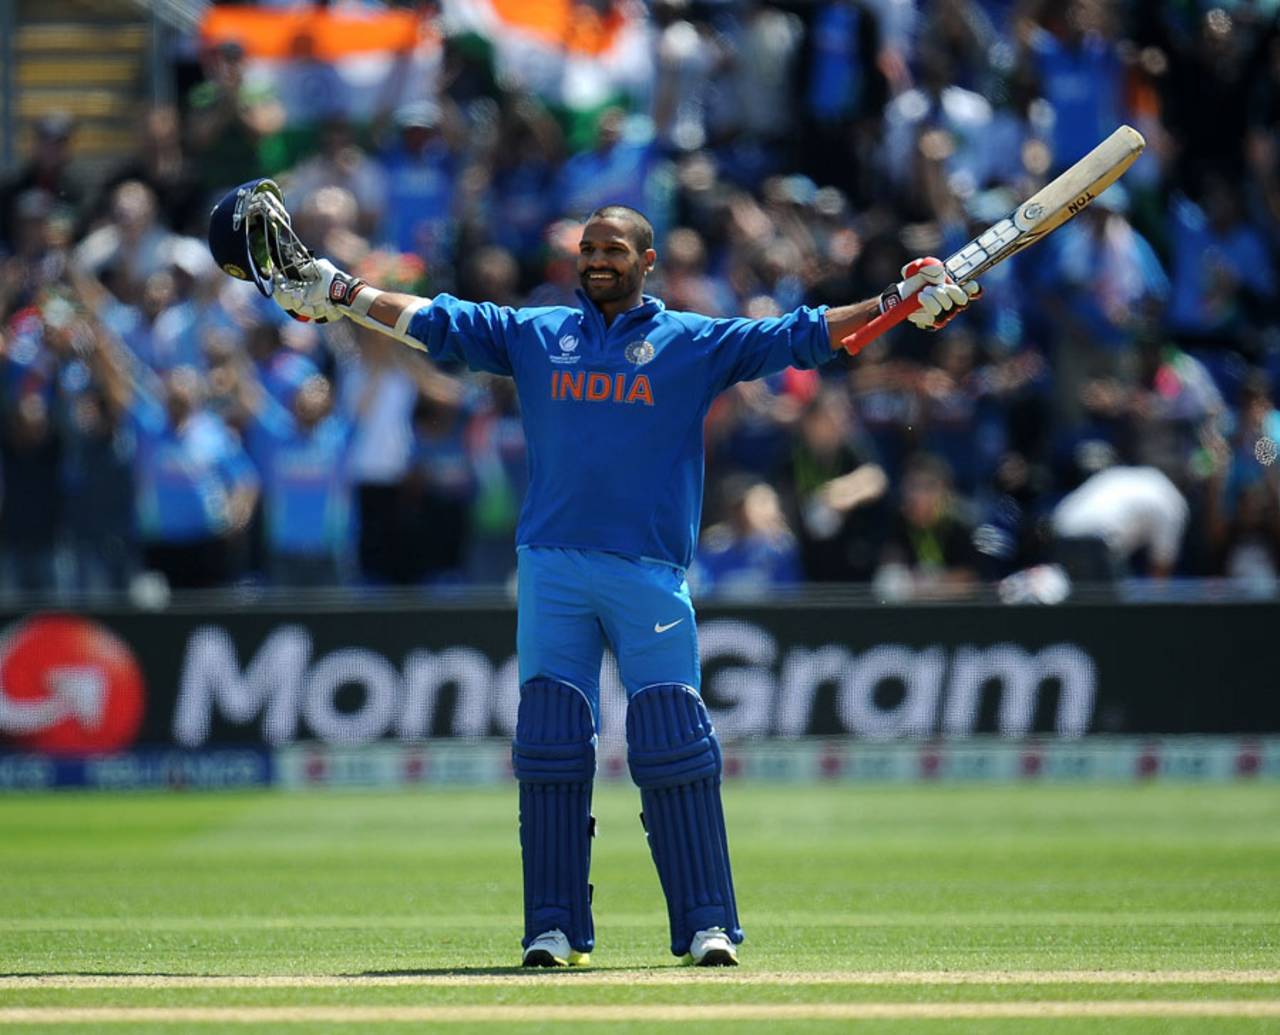 Shikhar Dhawan: took a while to find the spotlight, but now stands firmly under it&nbsp;&nbsp;&bull;&nbsp;&nbsp;ICC/Christopher Lee